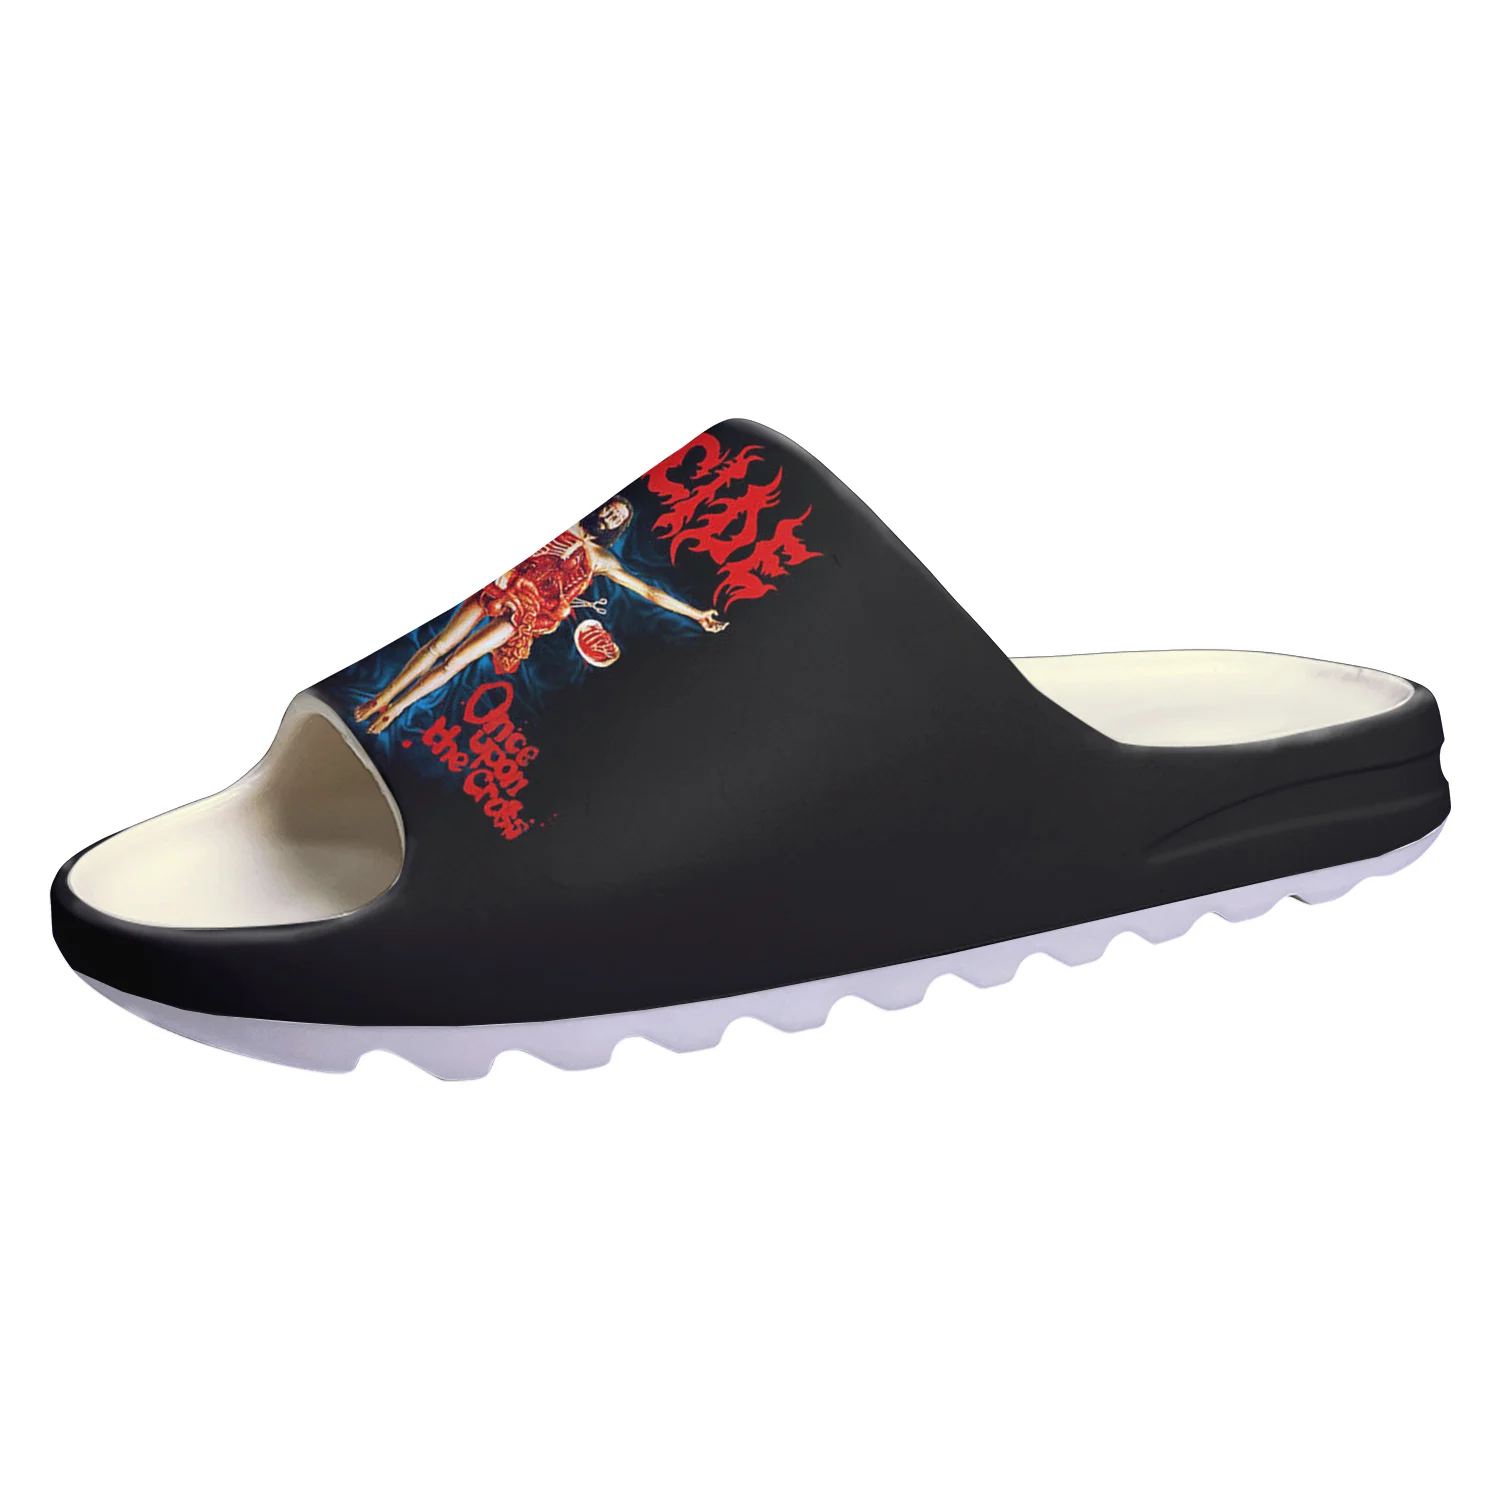 

Deicide Band Rock Soft Sole Sllipers Home Clogs Step on Water Shoes Mens Womens Teenager Legion Beach Customize on Shit Sandals